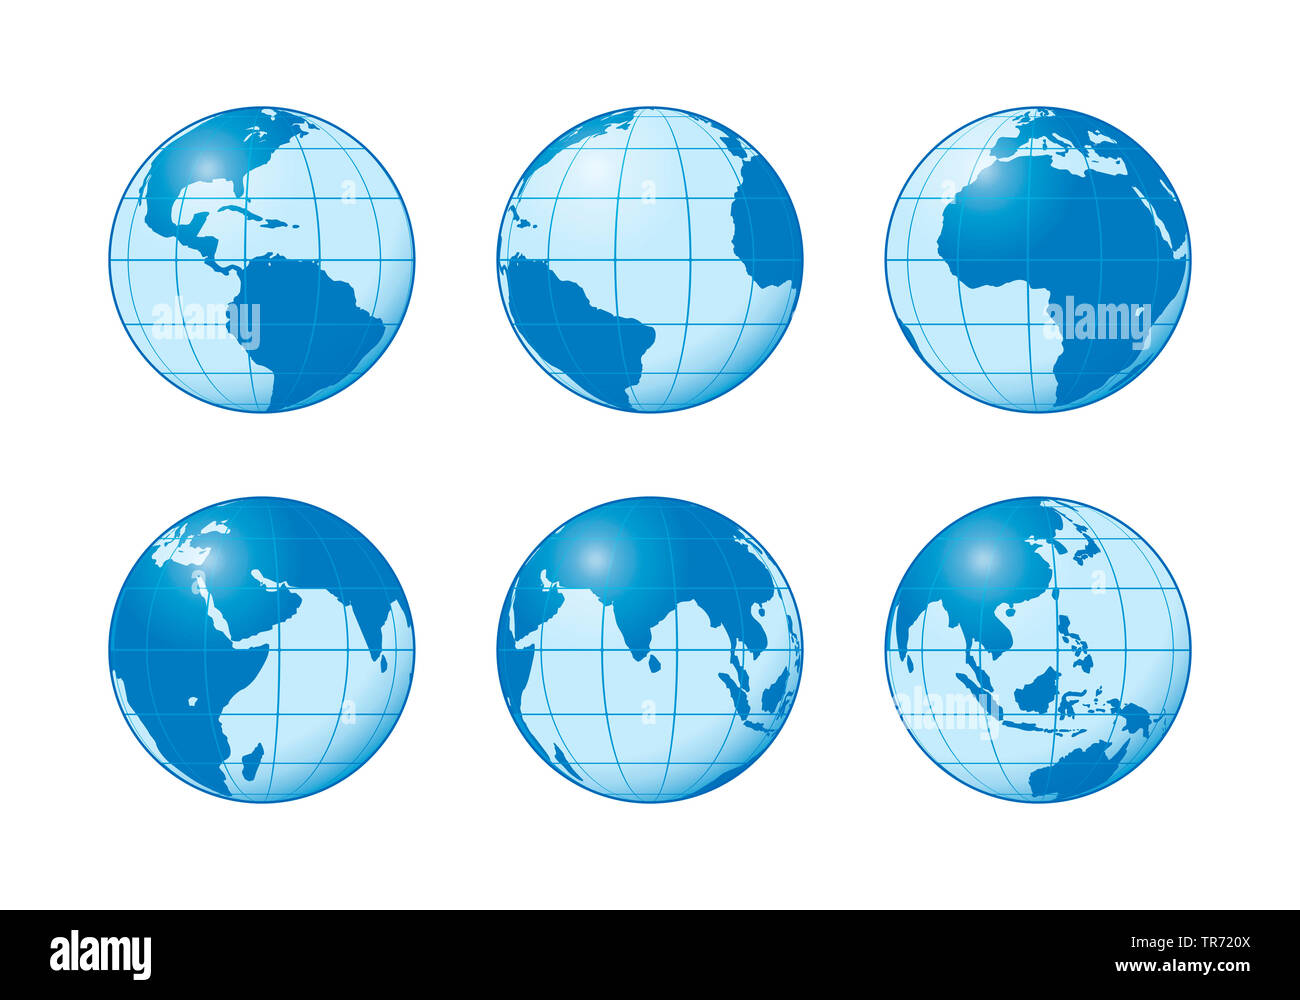 3D computer graphic, 6 globes showing different views on the continent in shades of blue Stock Photo